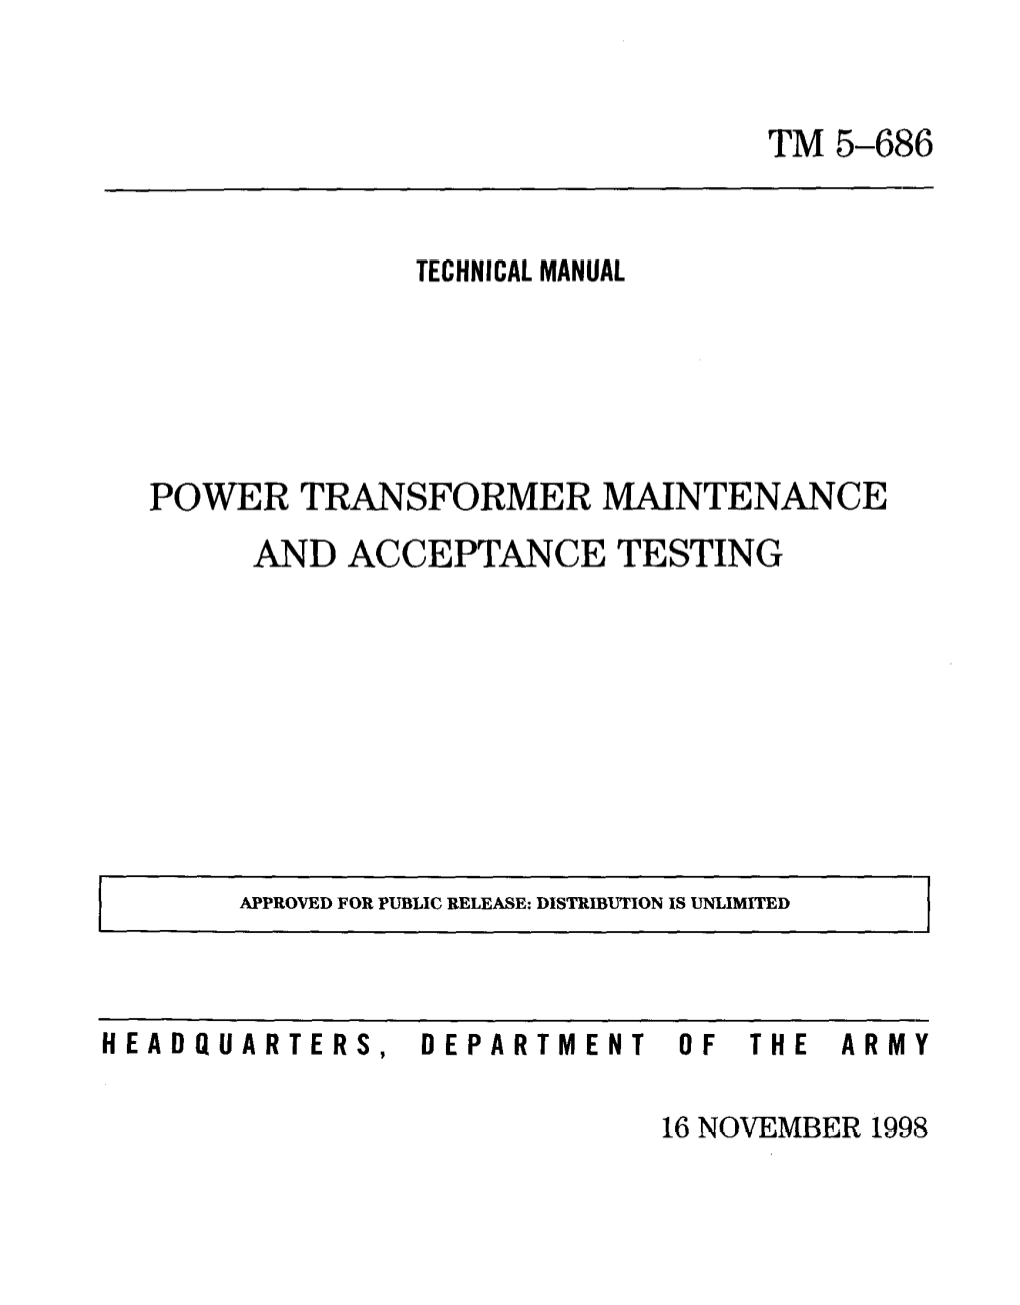 TM 5-686 Power Transformer Maintenance and Acceptance Testing